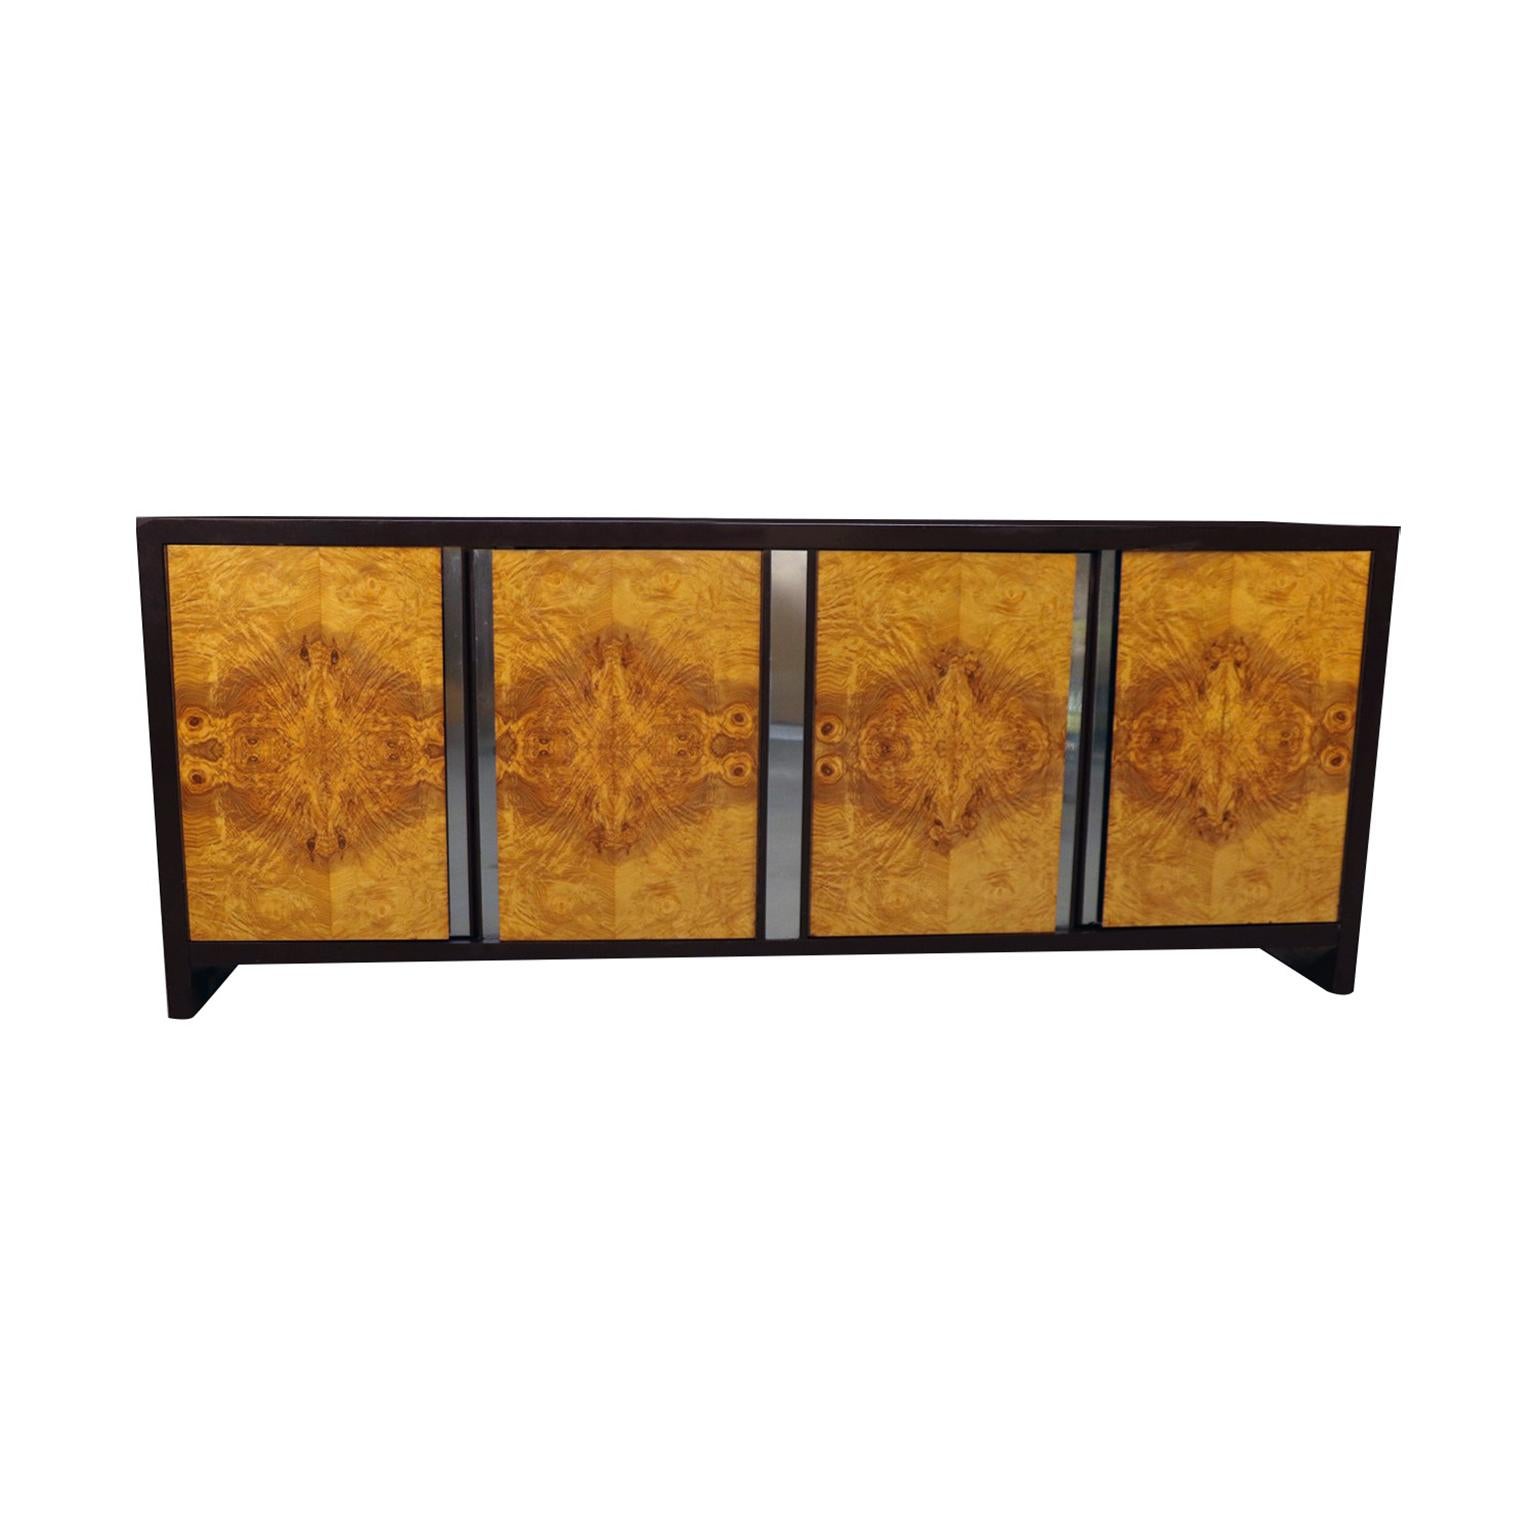 Handsome, richly grained burl wood, Mid-Century Modern, 4-door dresser, attributed to Milo Baughman, circa 1970s. Expertly crafted, this absolute jewel remains in clean vintage condition. Features a chocolate brown frame and top, above a pair of